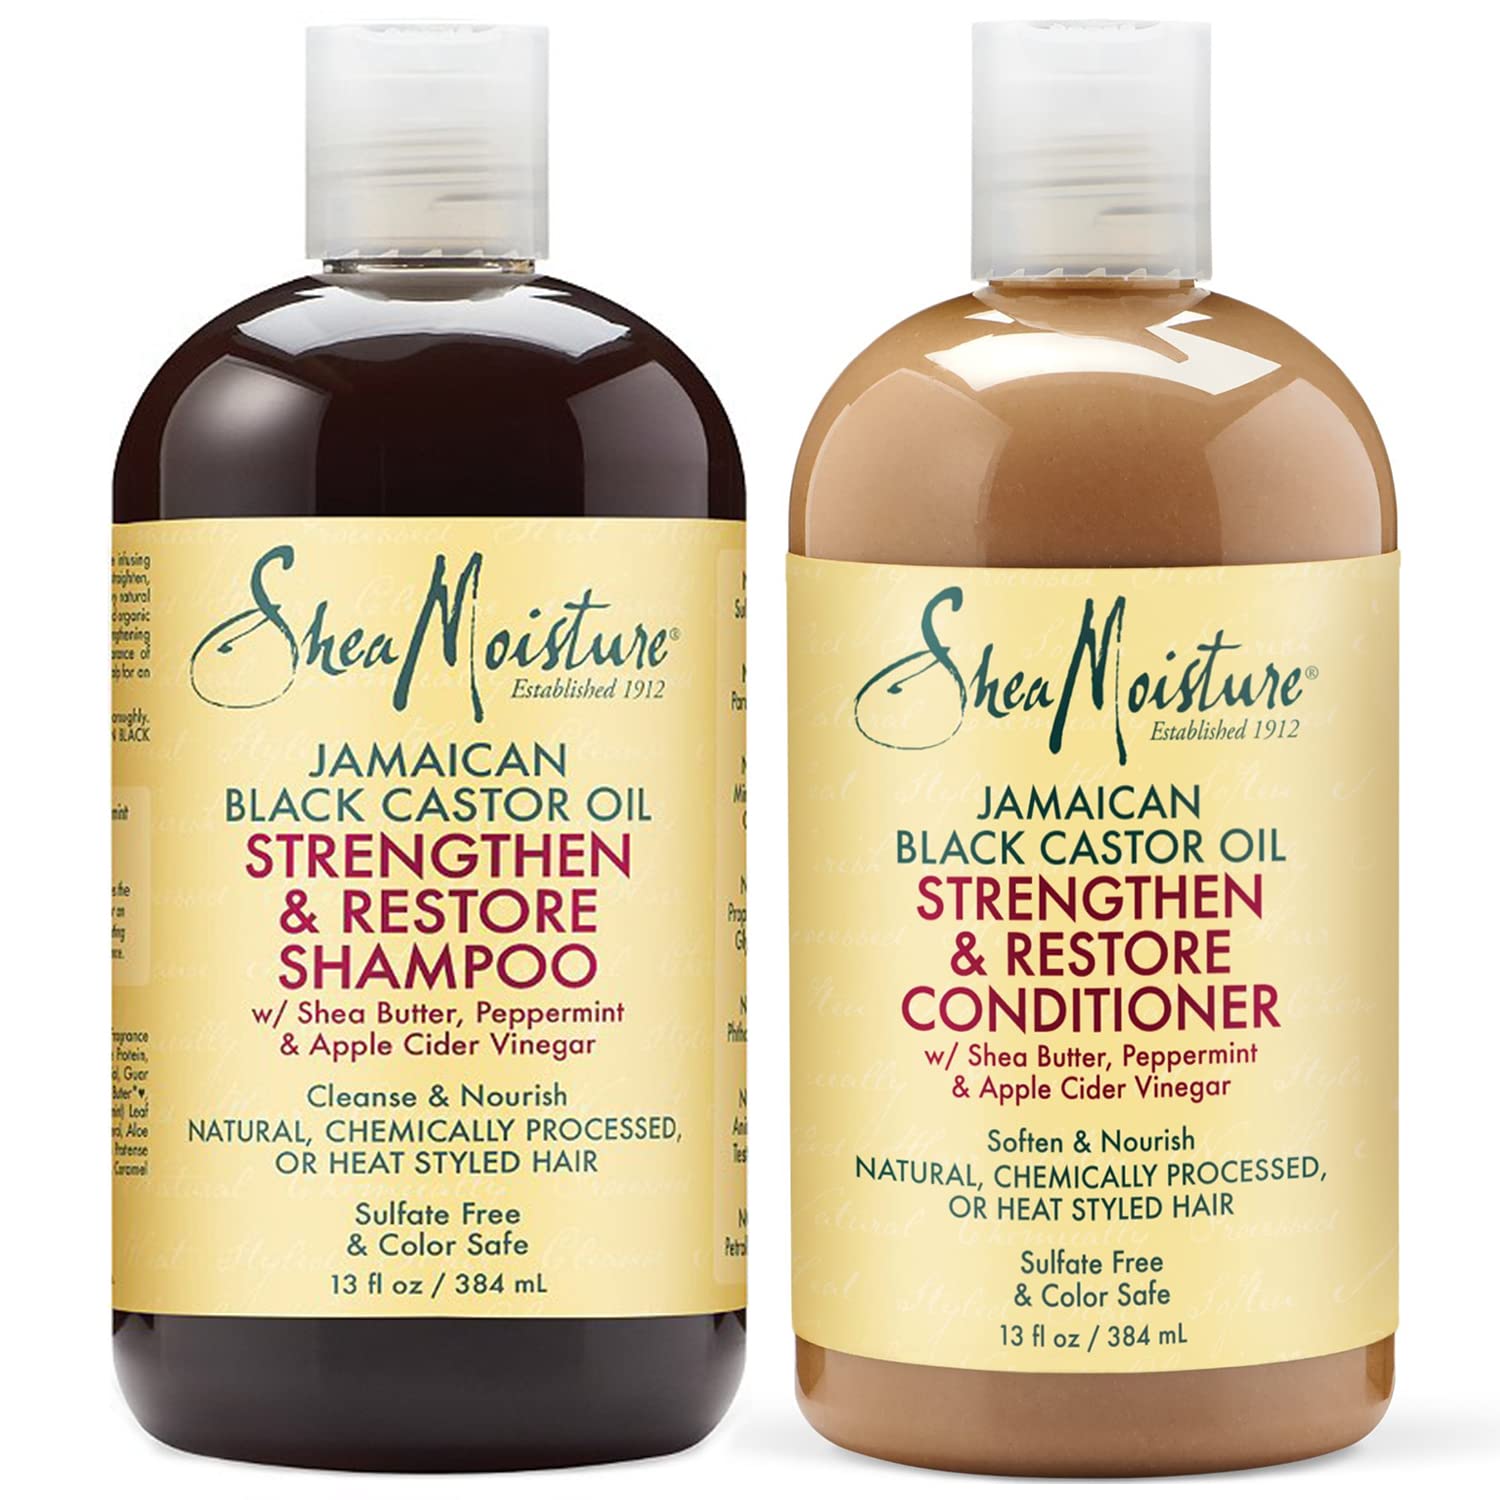 The Benefits of Shea Moisture Shampoo and Conditioner